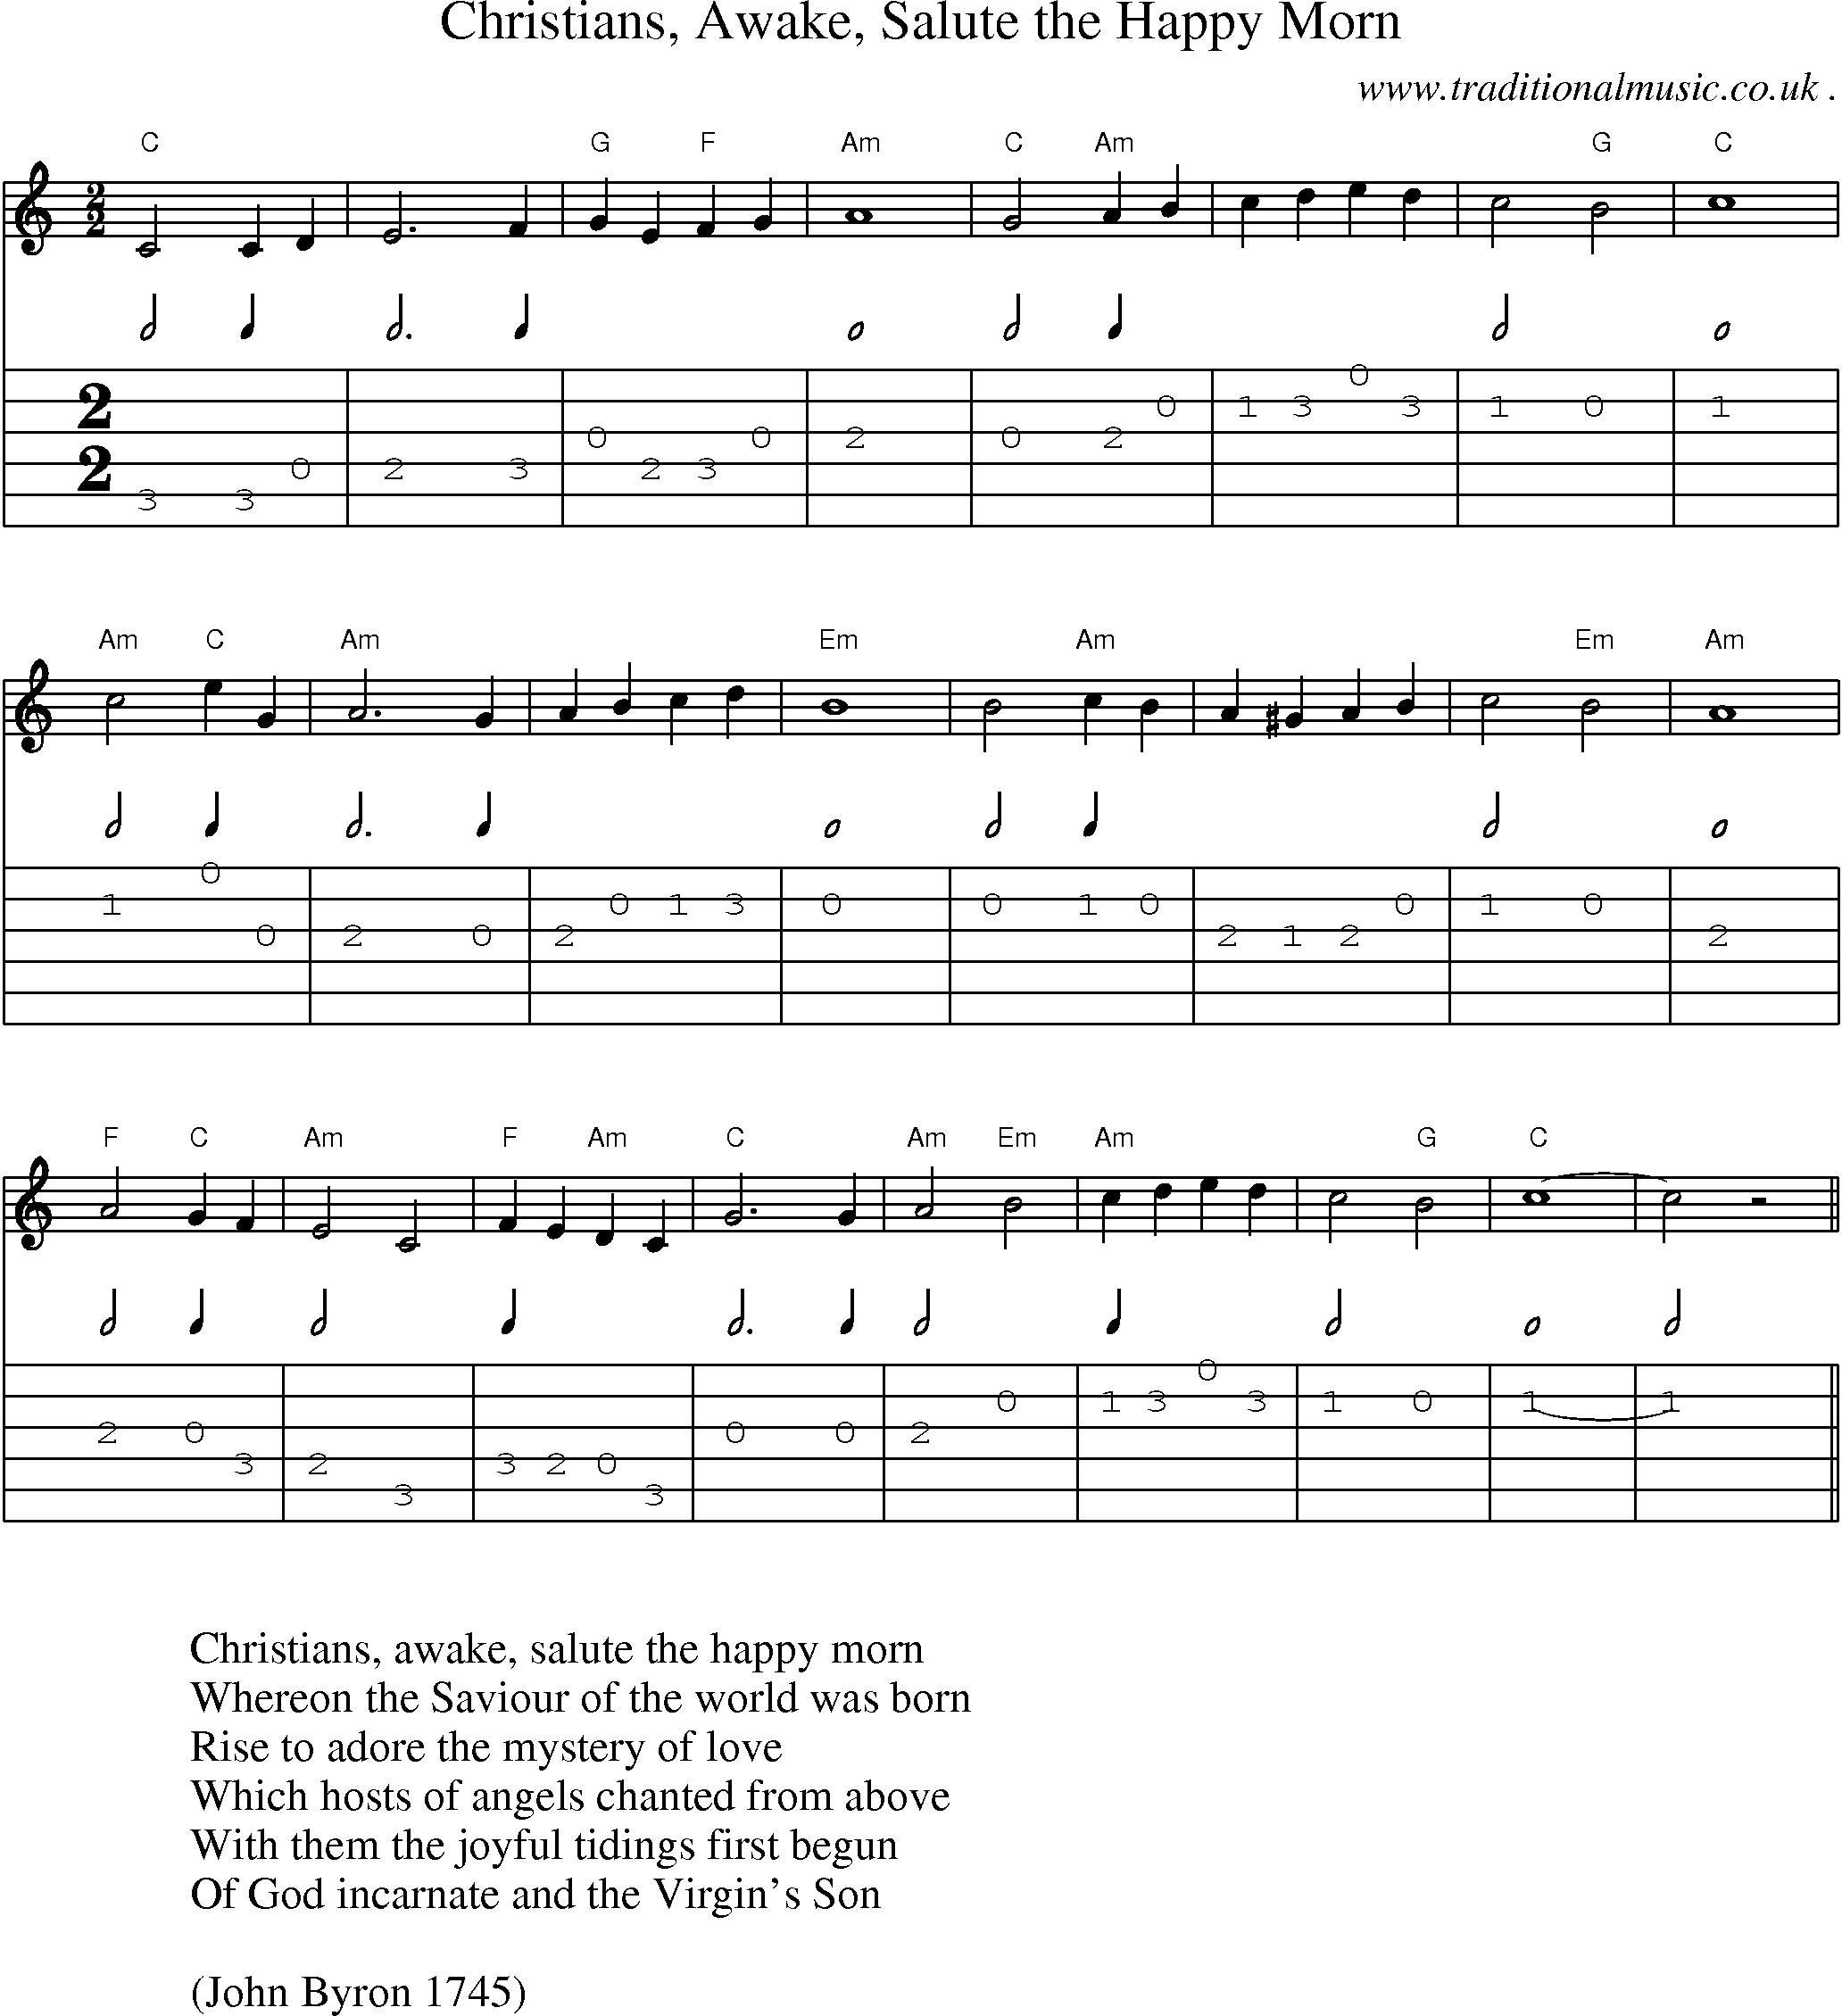 Music Score and Guitar Tabs for Christians Awake Salute the Happy Morn